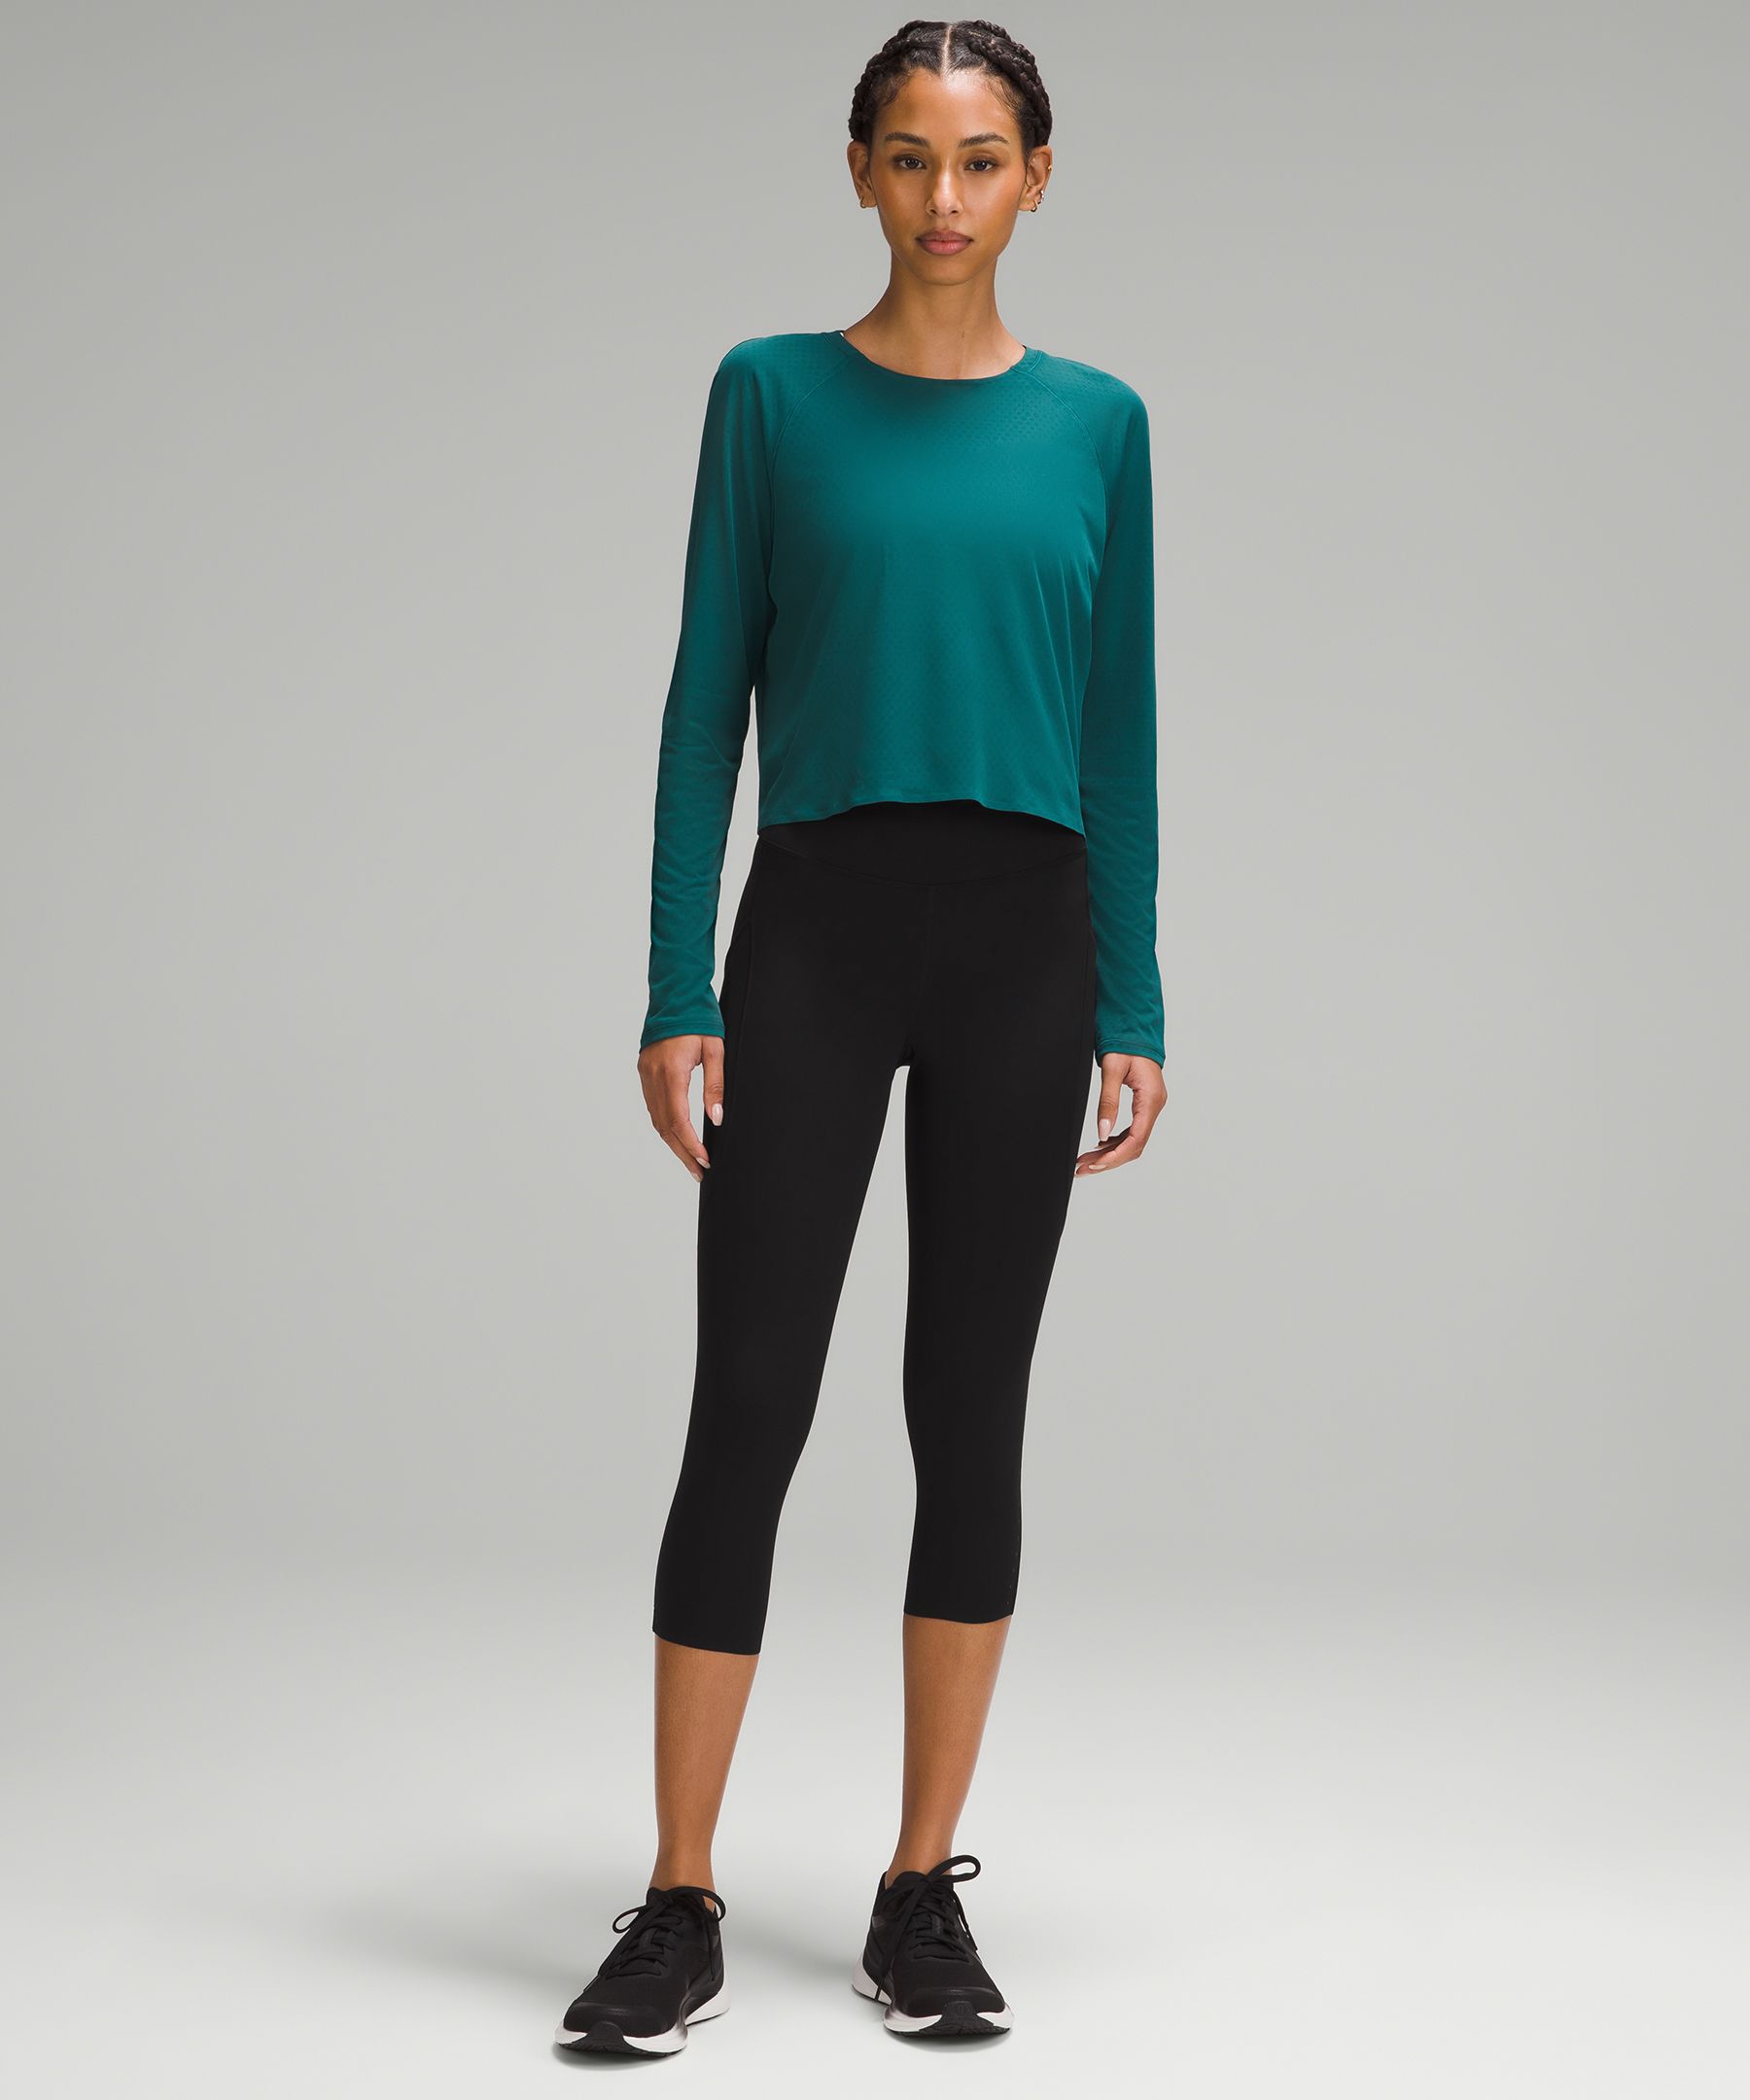 Fast and Free High-Rise Crop with Pockets 19" | Women's Capris